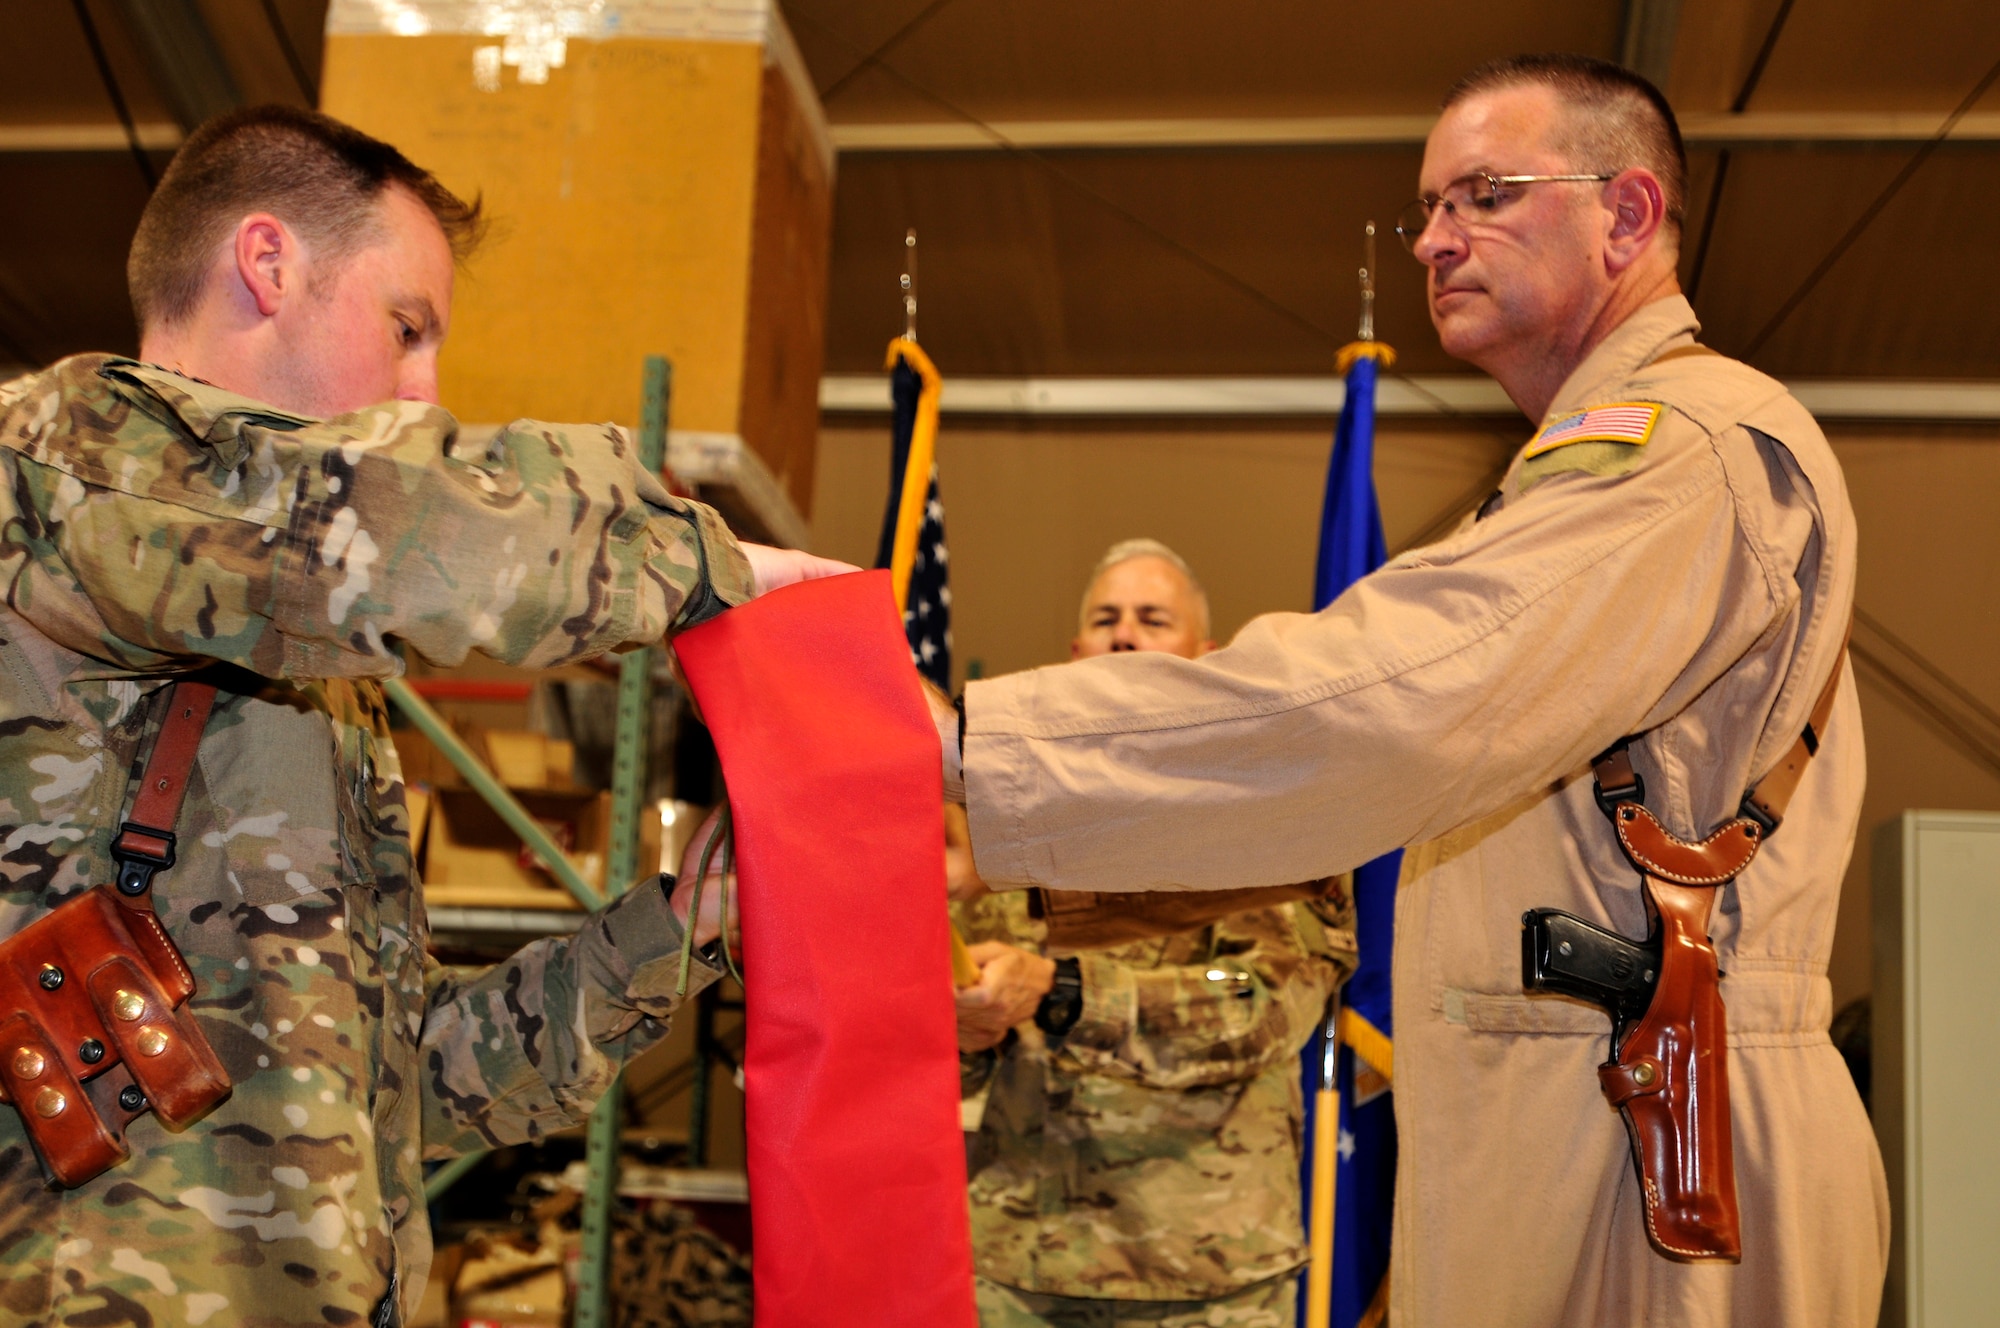 Col. Robert Kiebler, commander, 451st Expeditionary Operations Group and Lt. Col. Mike Lunt, commander, 702nd Expeditionary Airlift Squadron case the squadron colors at a deactivation ceremony at Kandahar Airfield.  Casing the colors signifies the full deactivation of the squadron. The squadron was established in July 2011 and was deactivated on Monday.  The squadron supported tactical airlift requirements in support of operations in Afghanistan (U.S. Army Photo - Sgt. Daniel J. Schroeder)